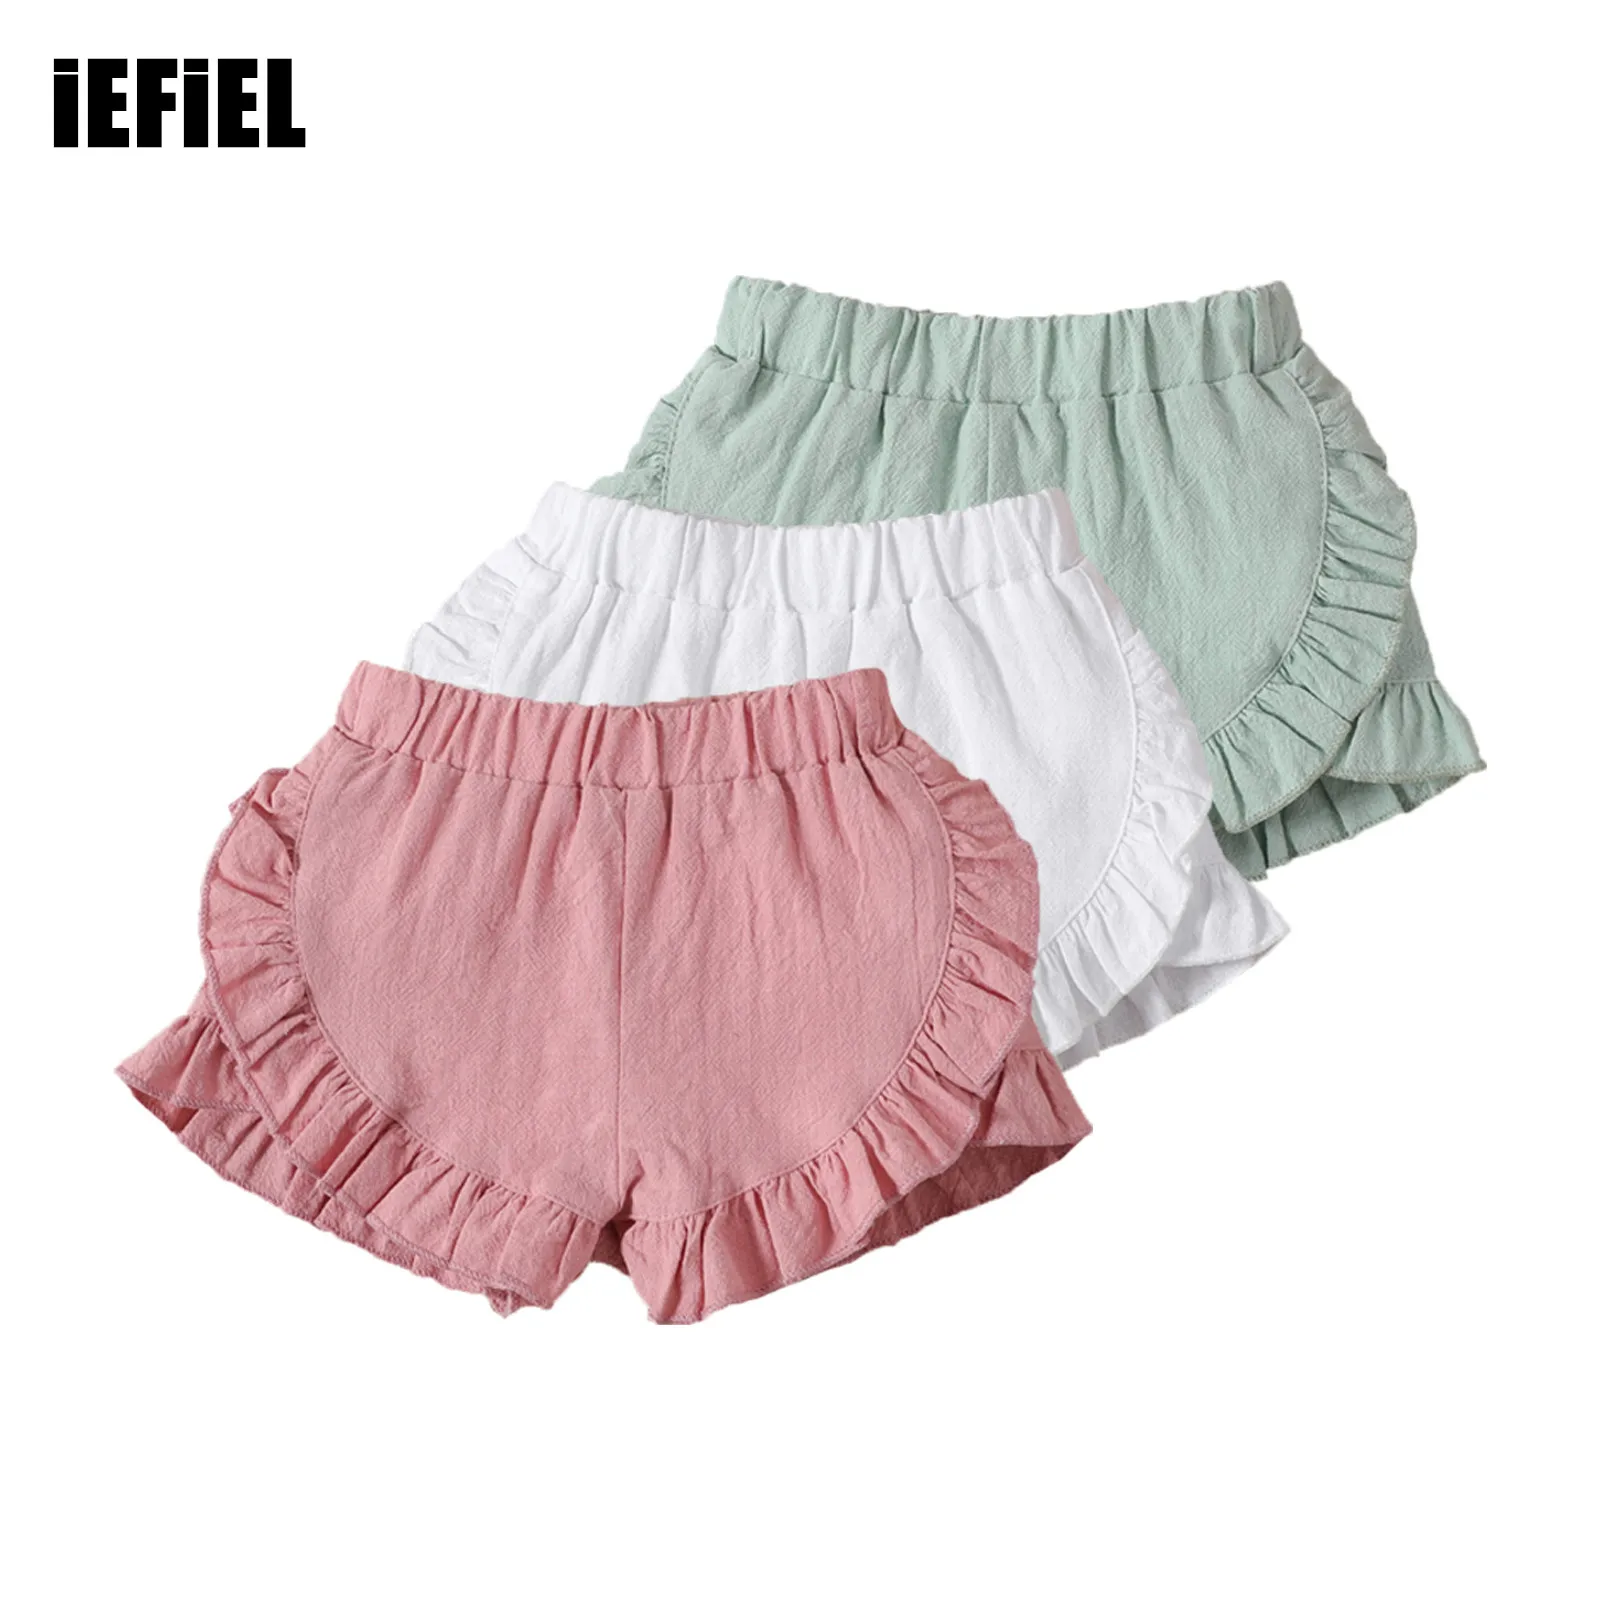 

Baby Girls Summer Cotton Boyshorts Bloomers Ruffled Flounce Bloomers Underwear Loose Harem Shorts Breathable Knickers Diaper